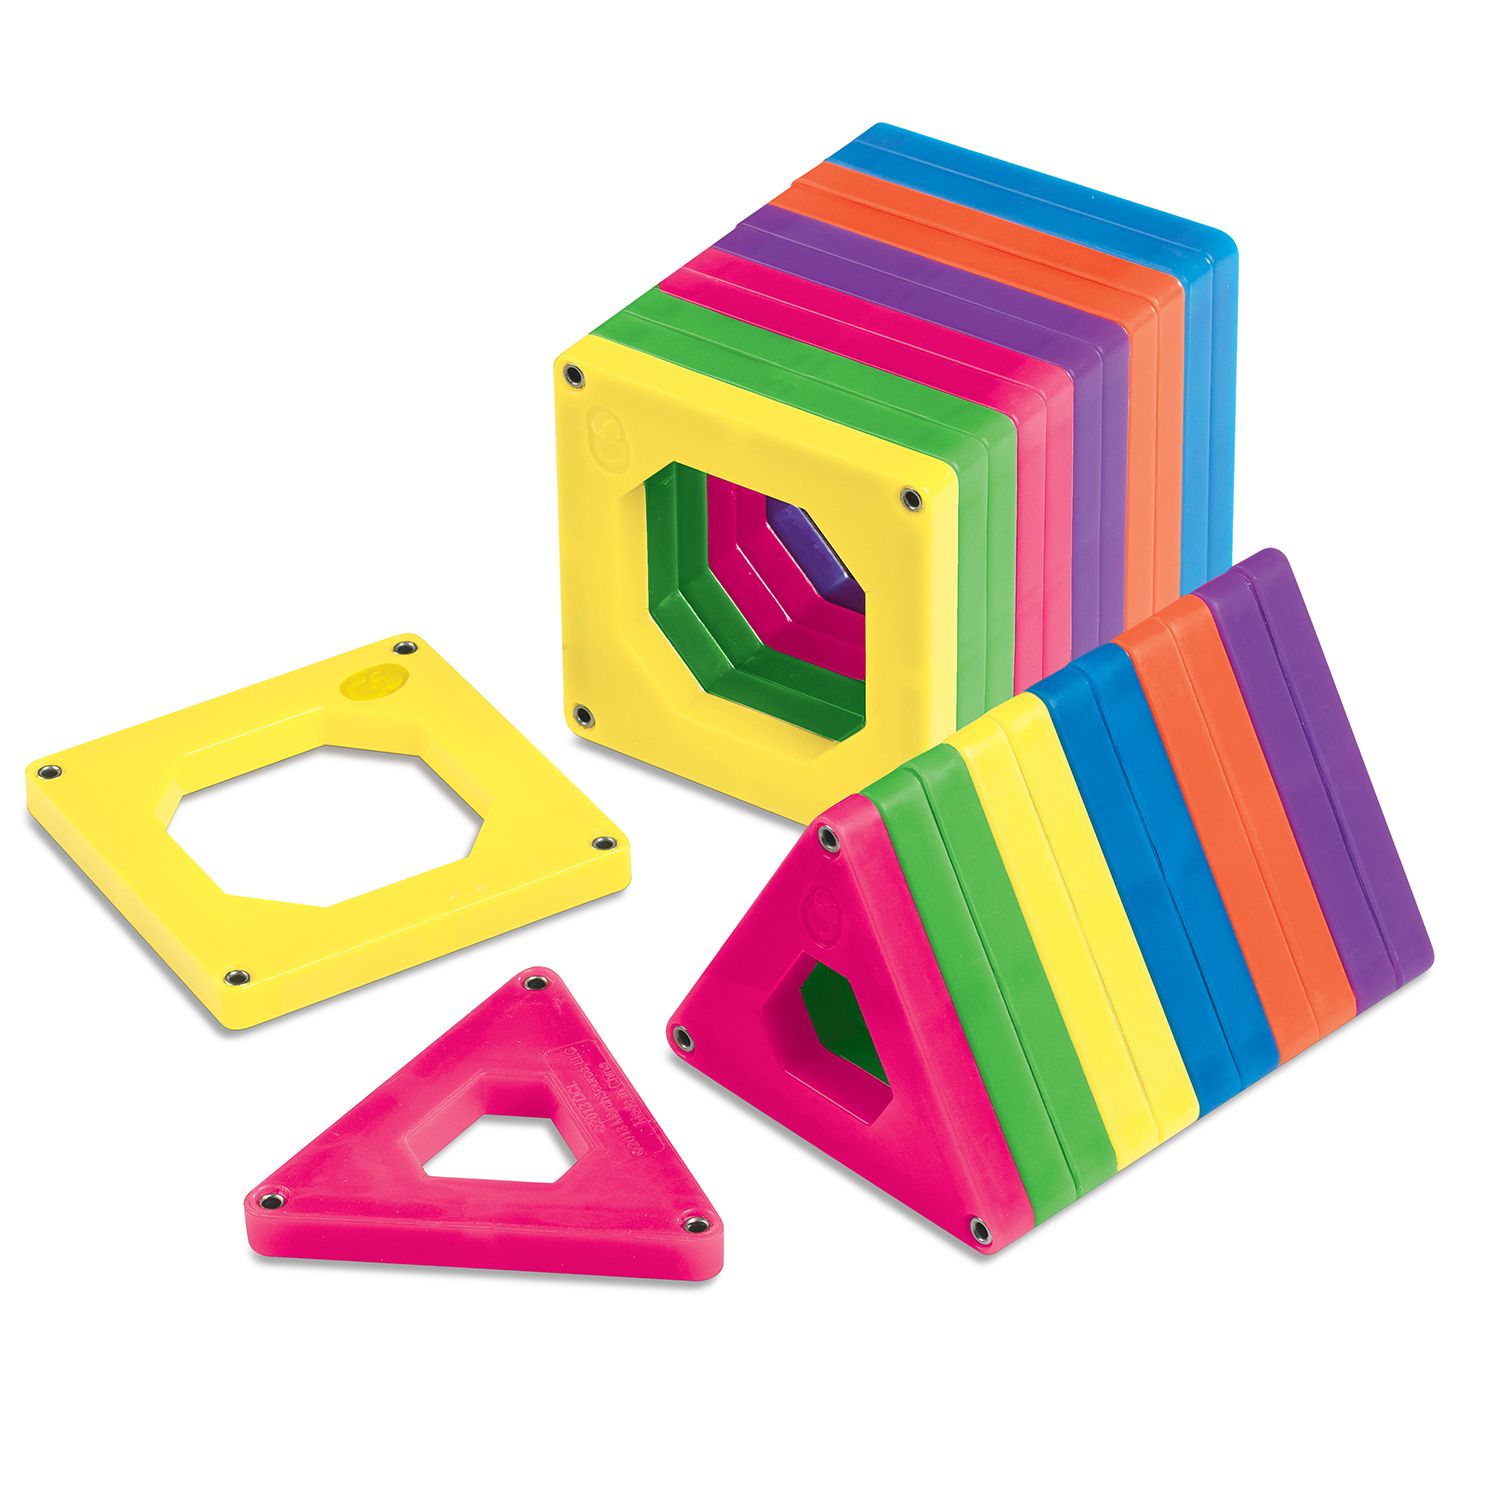 discovery magna tiles